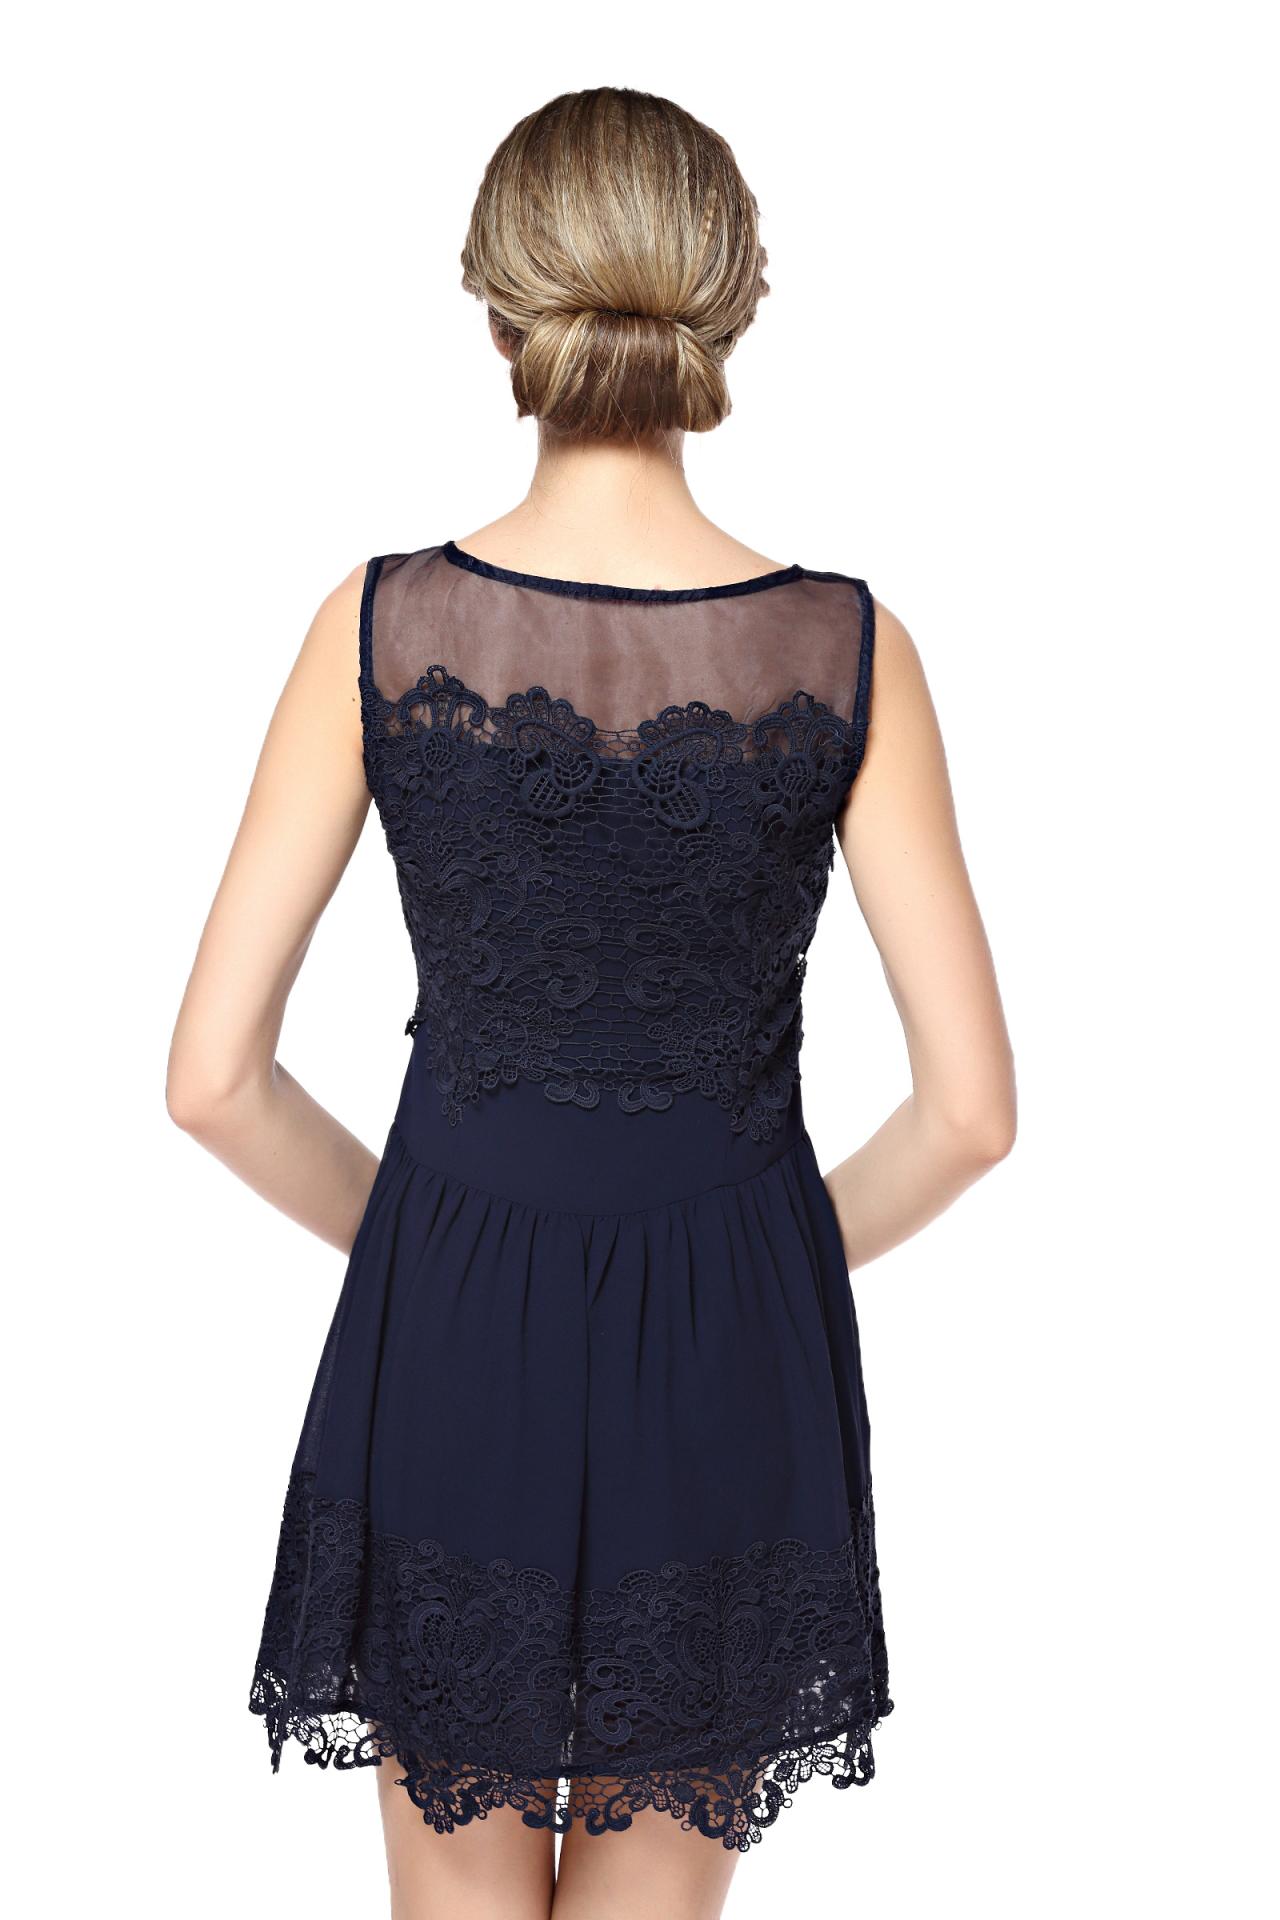 Women's Floral Lace Sleeveless Dress With Mesh Neck D091924 on Luulla